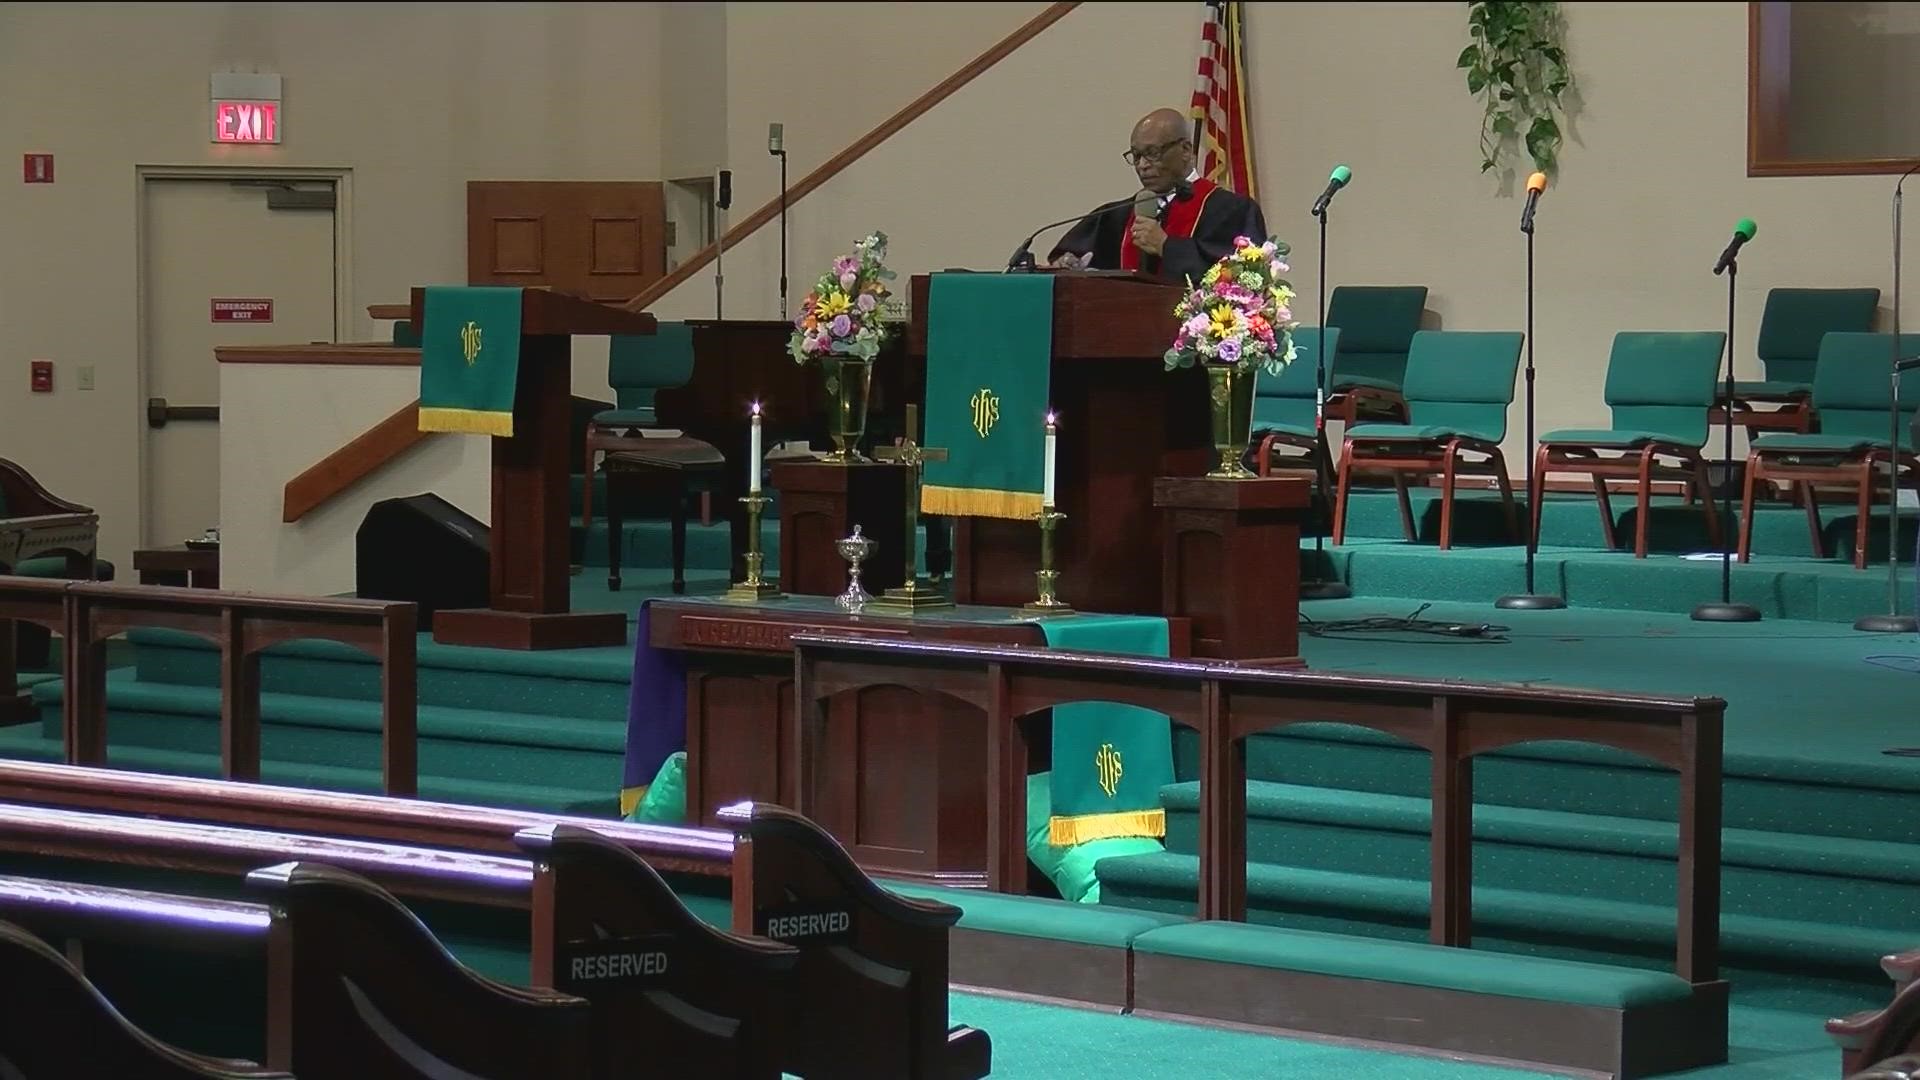 Warren AME Church in Toledo has played an important role in Toledo history.